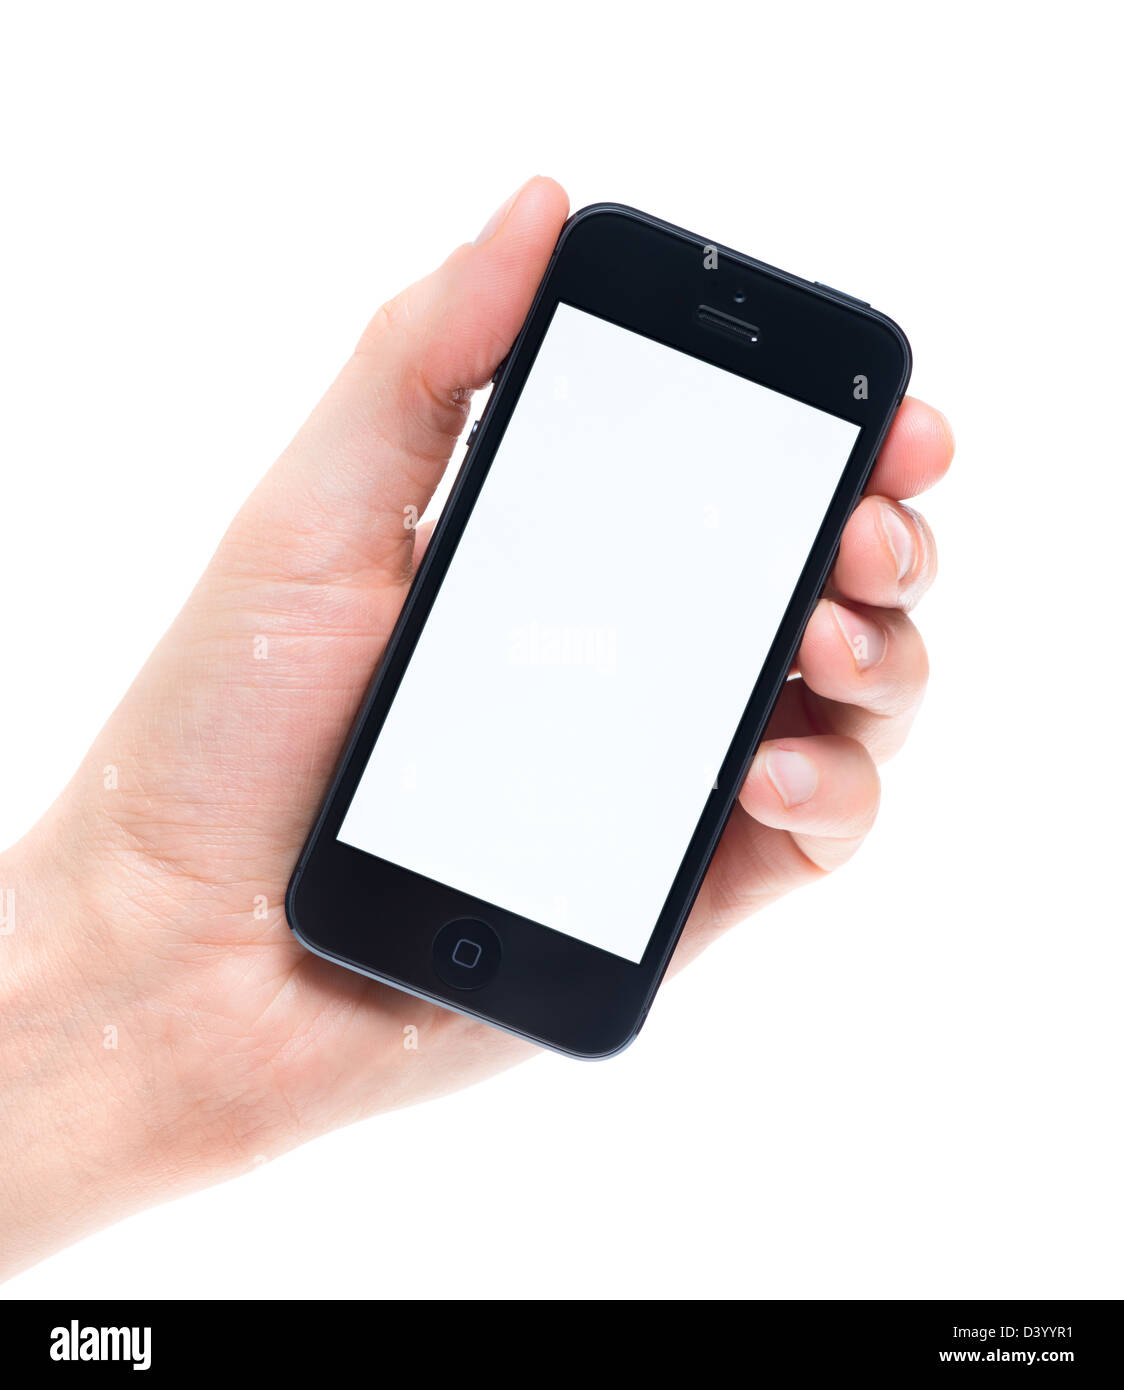 Man hand holding new black Apple iPhone 5 with blank screen. Stock Photo